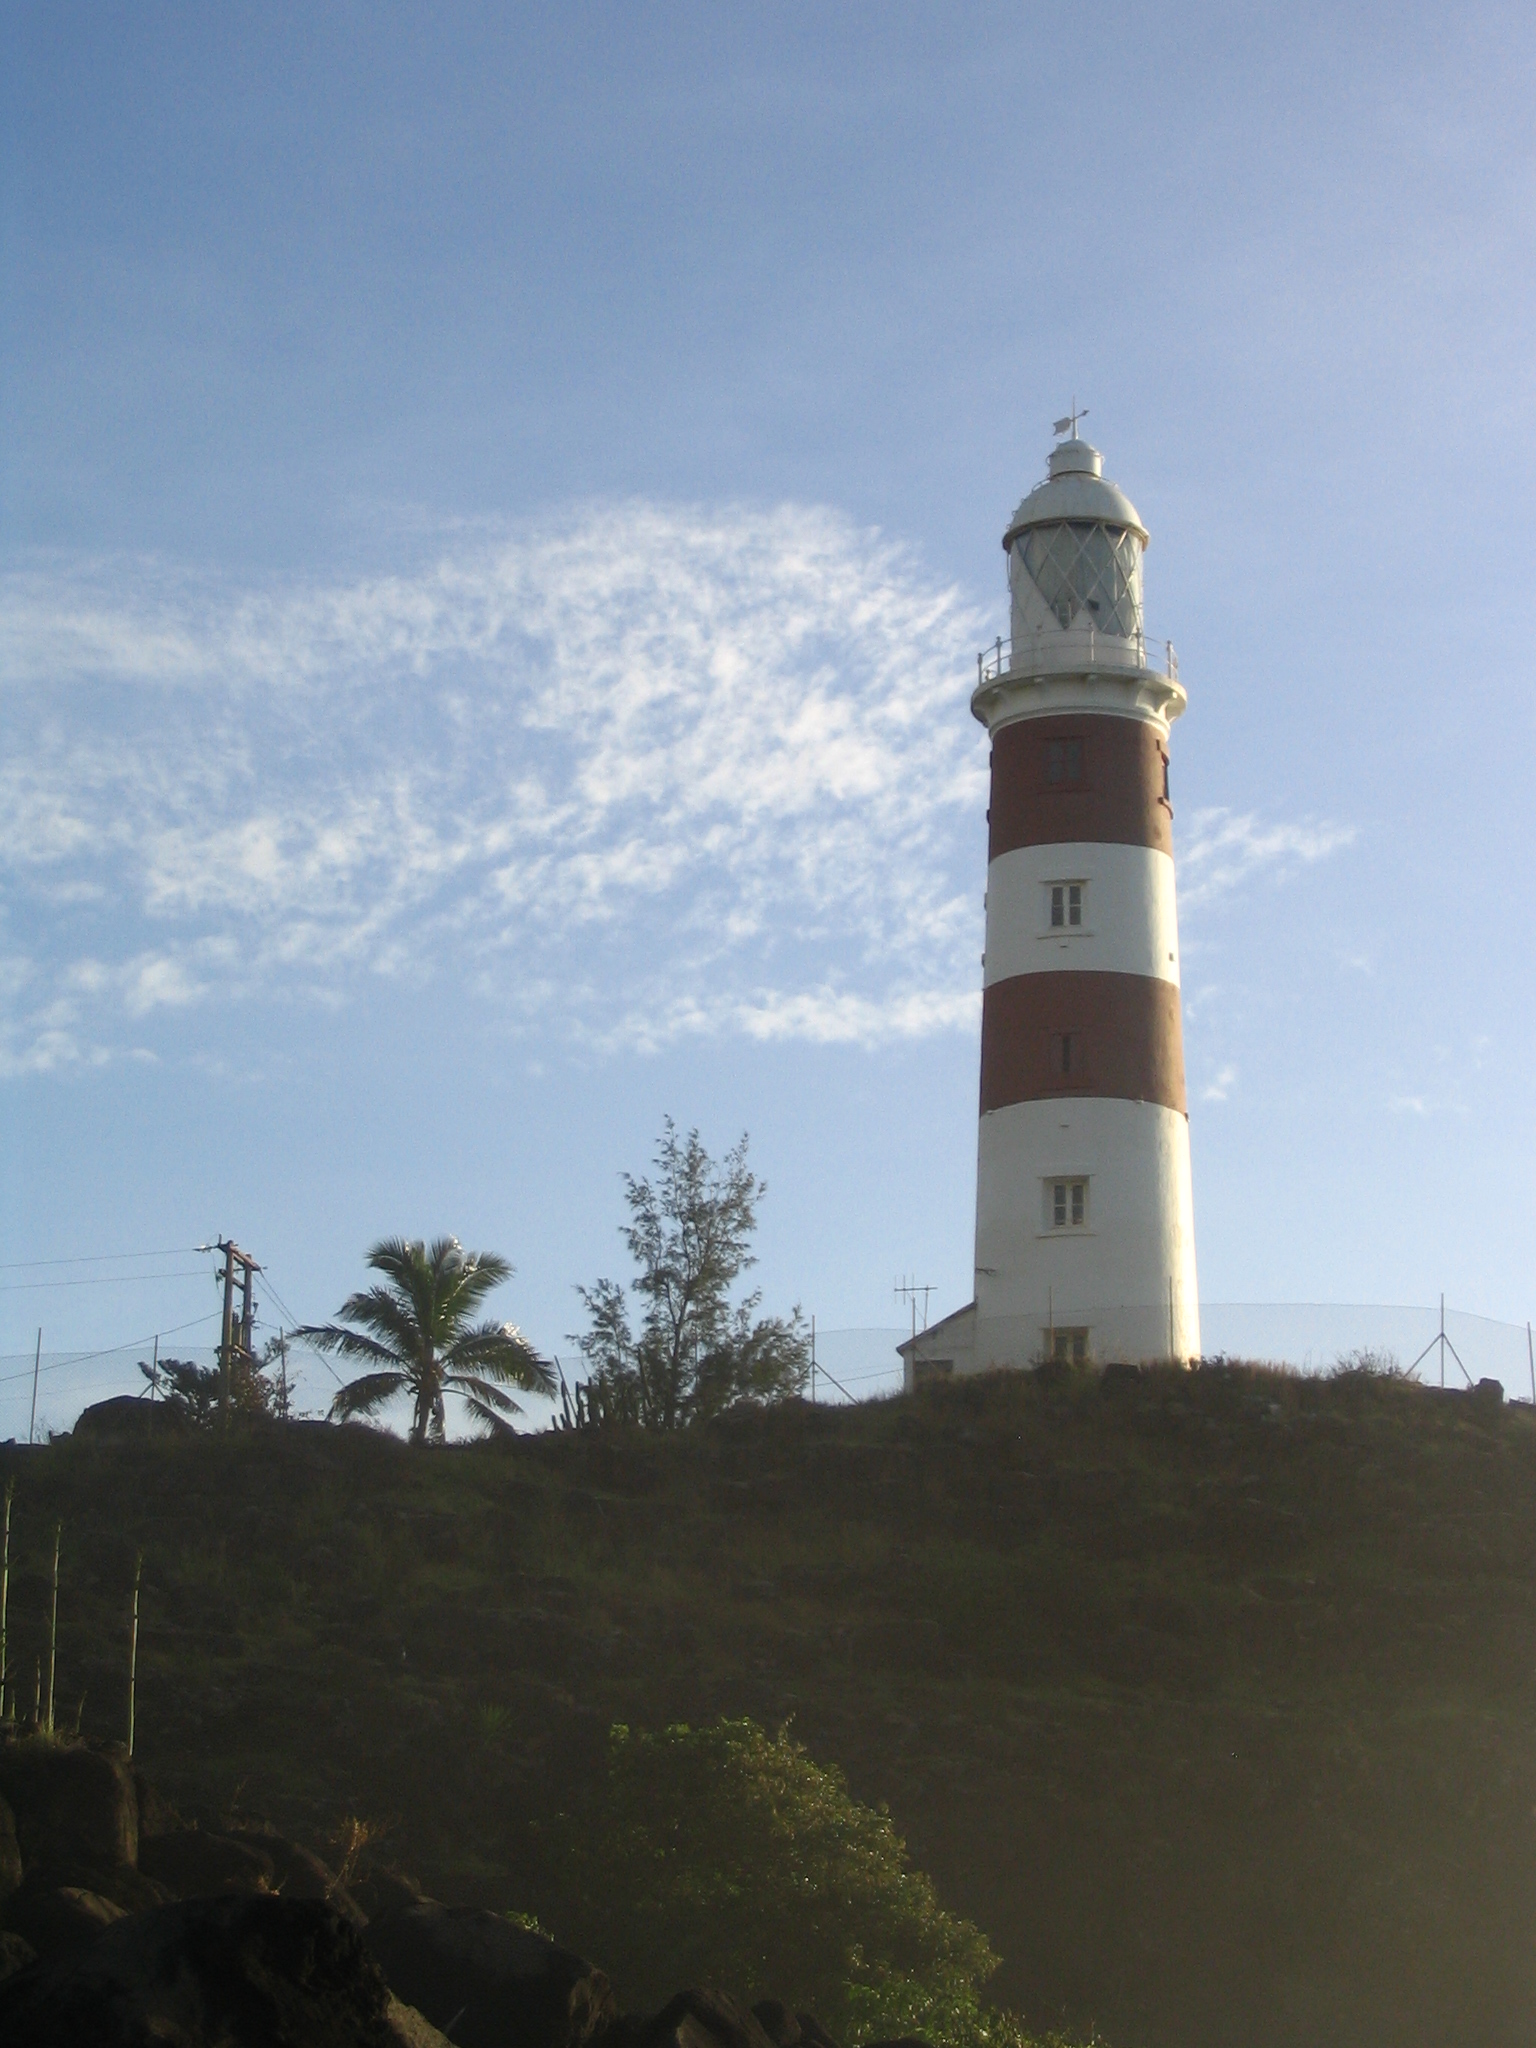 a white and red light house on top of a hill